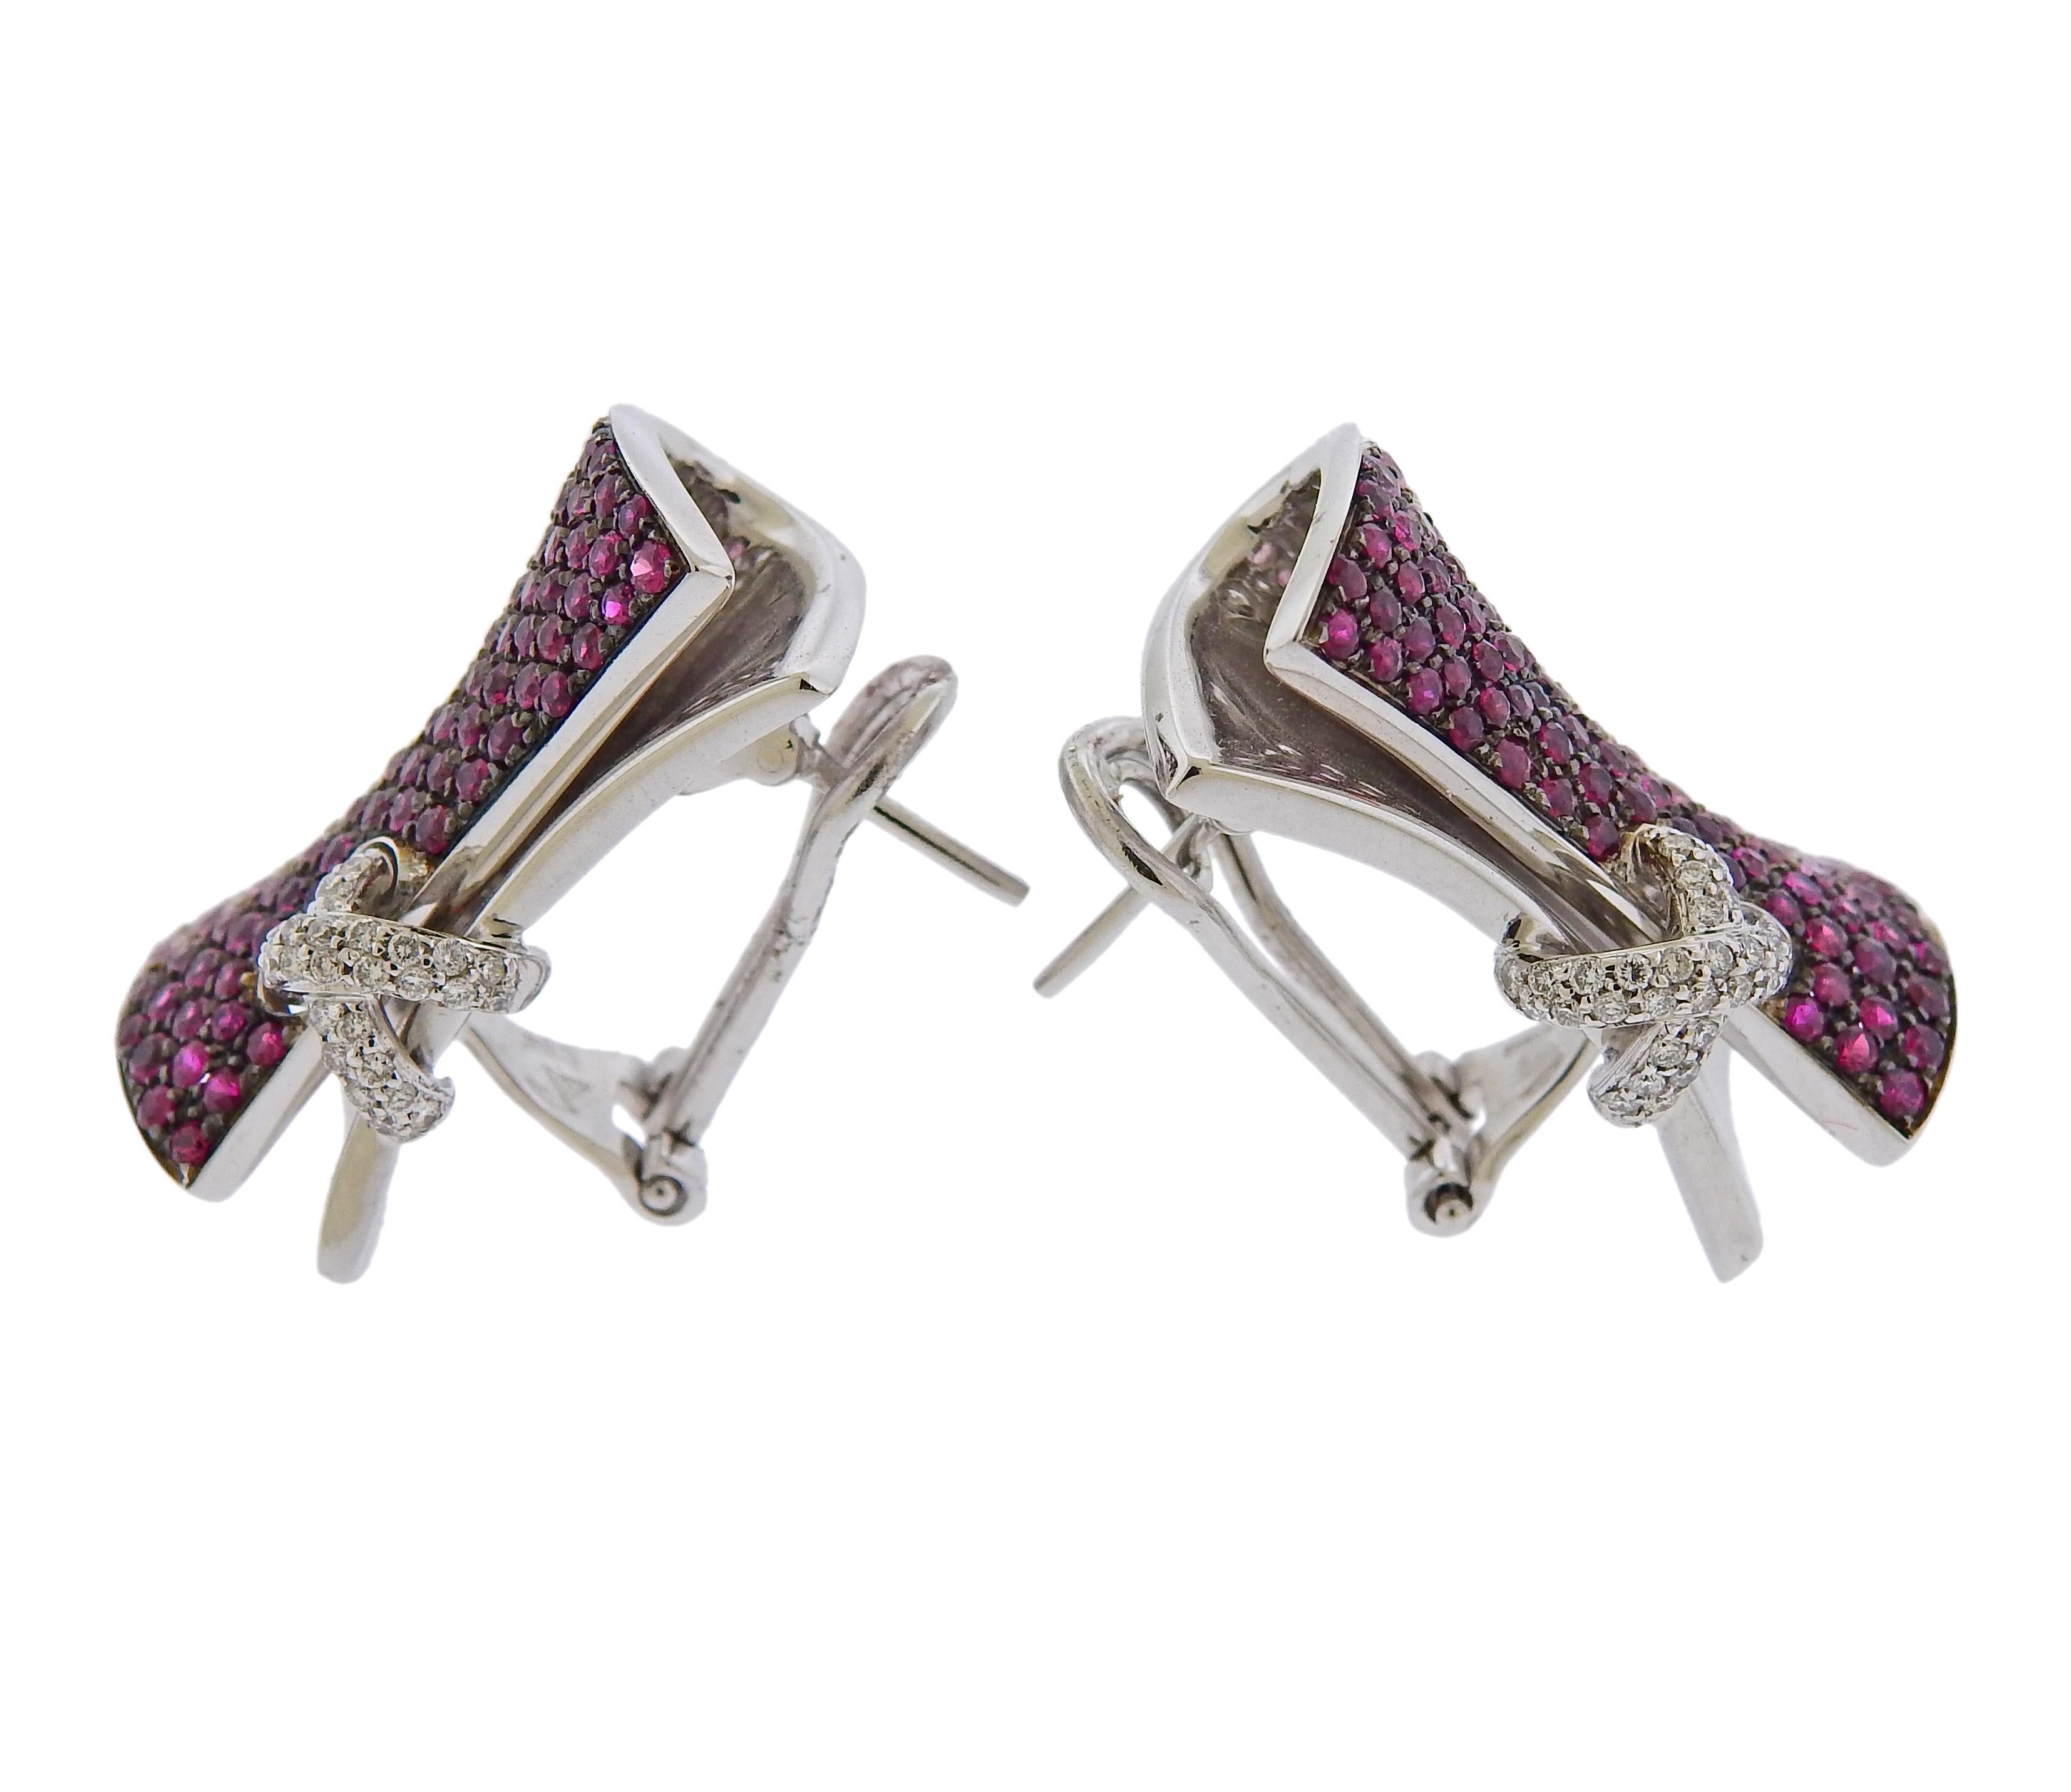 Pair of 18k white gold corset earrings by Stefan Hafner, set with multi color sapphires and approx. 0.95ctw in G/VS diamonds. Earrings are 25mm x 15mm. Weight is 20 grams. Marked SH triangle mark, 750, Italian mark.